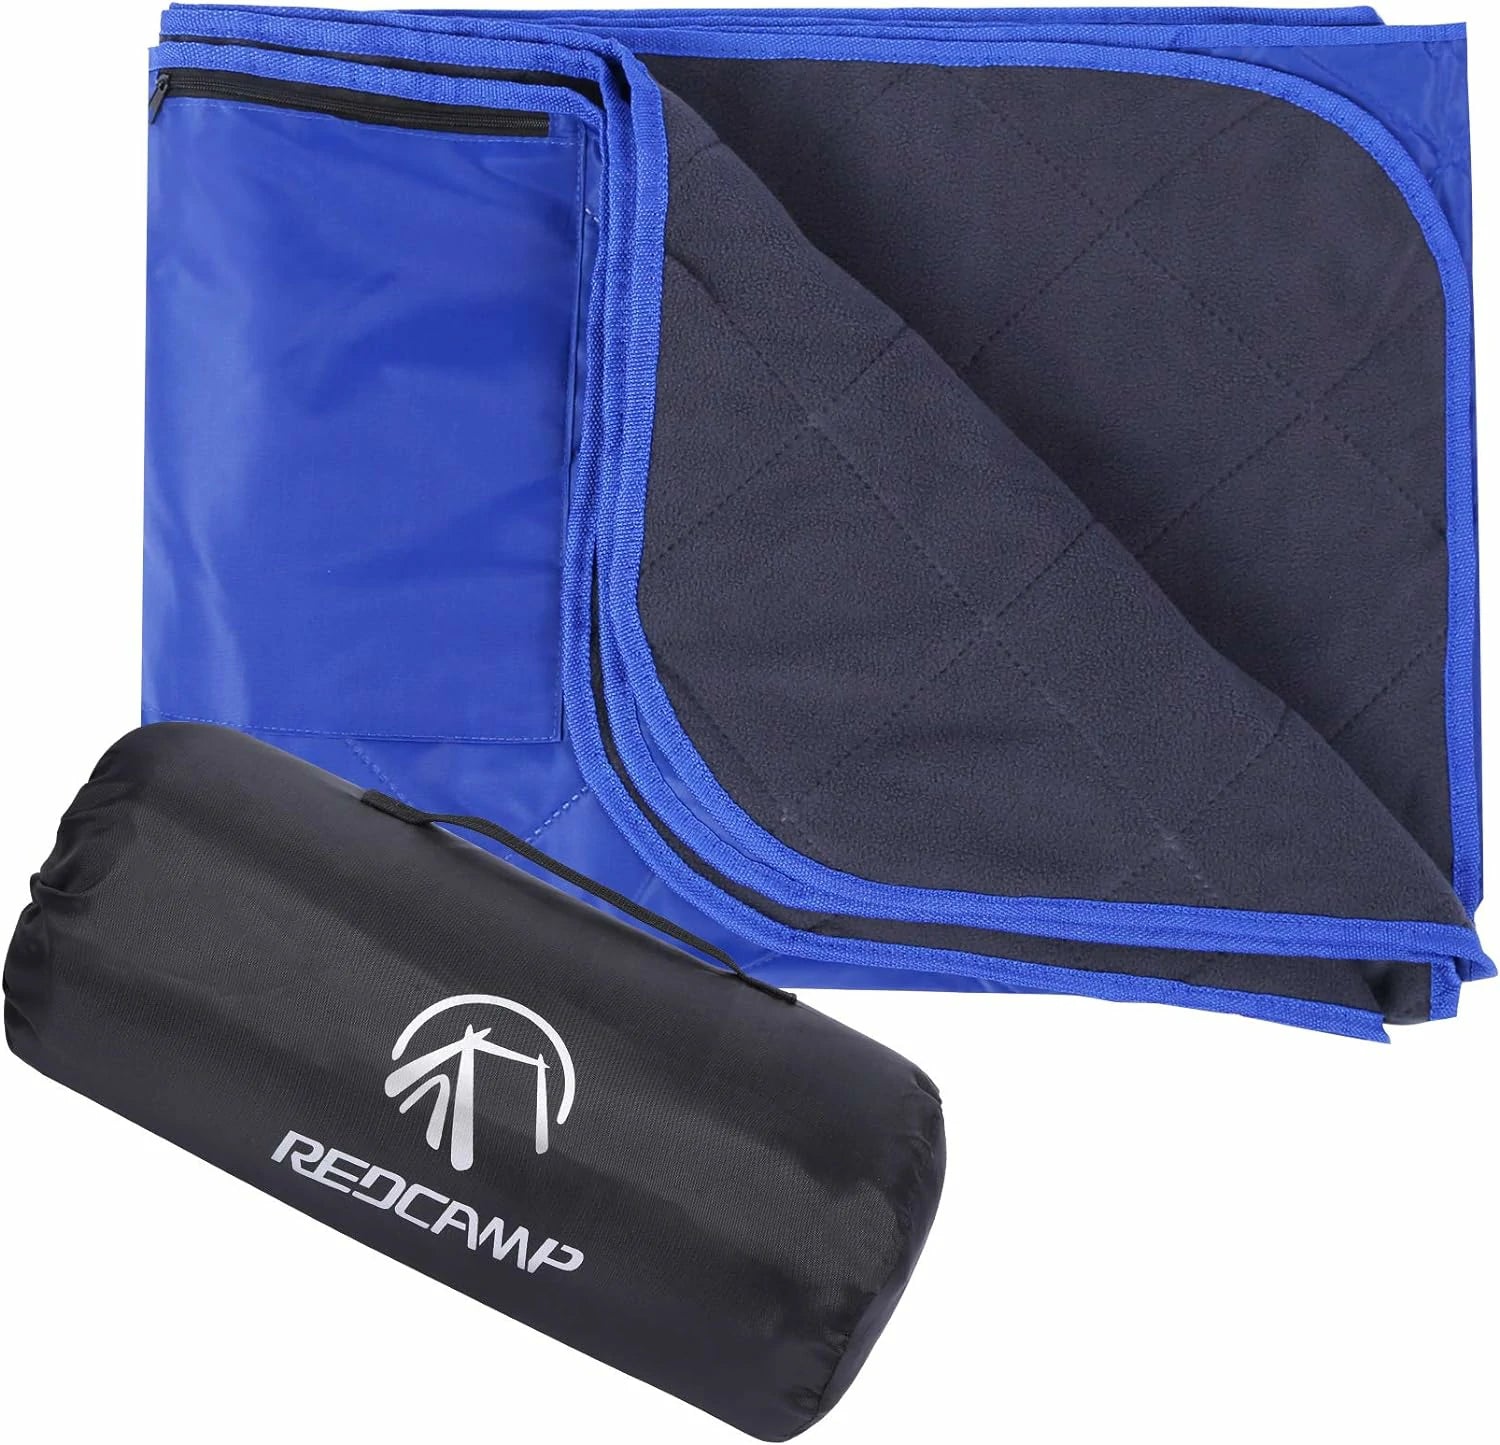 REDCAMP Large Waterproof Stadium Blanket for Cold Weather